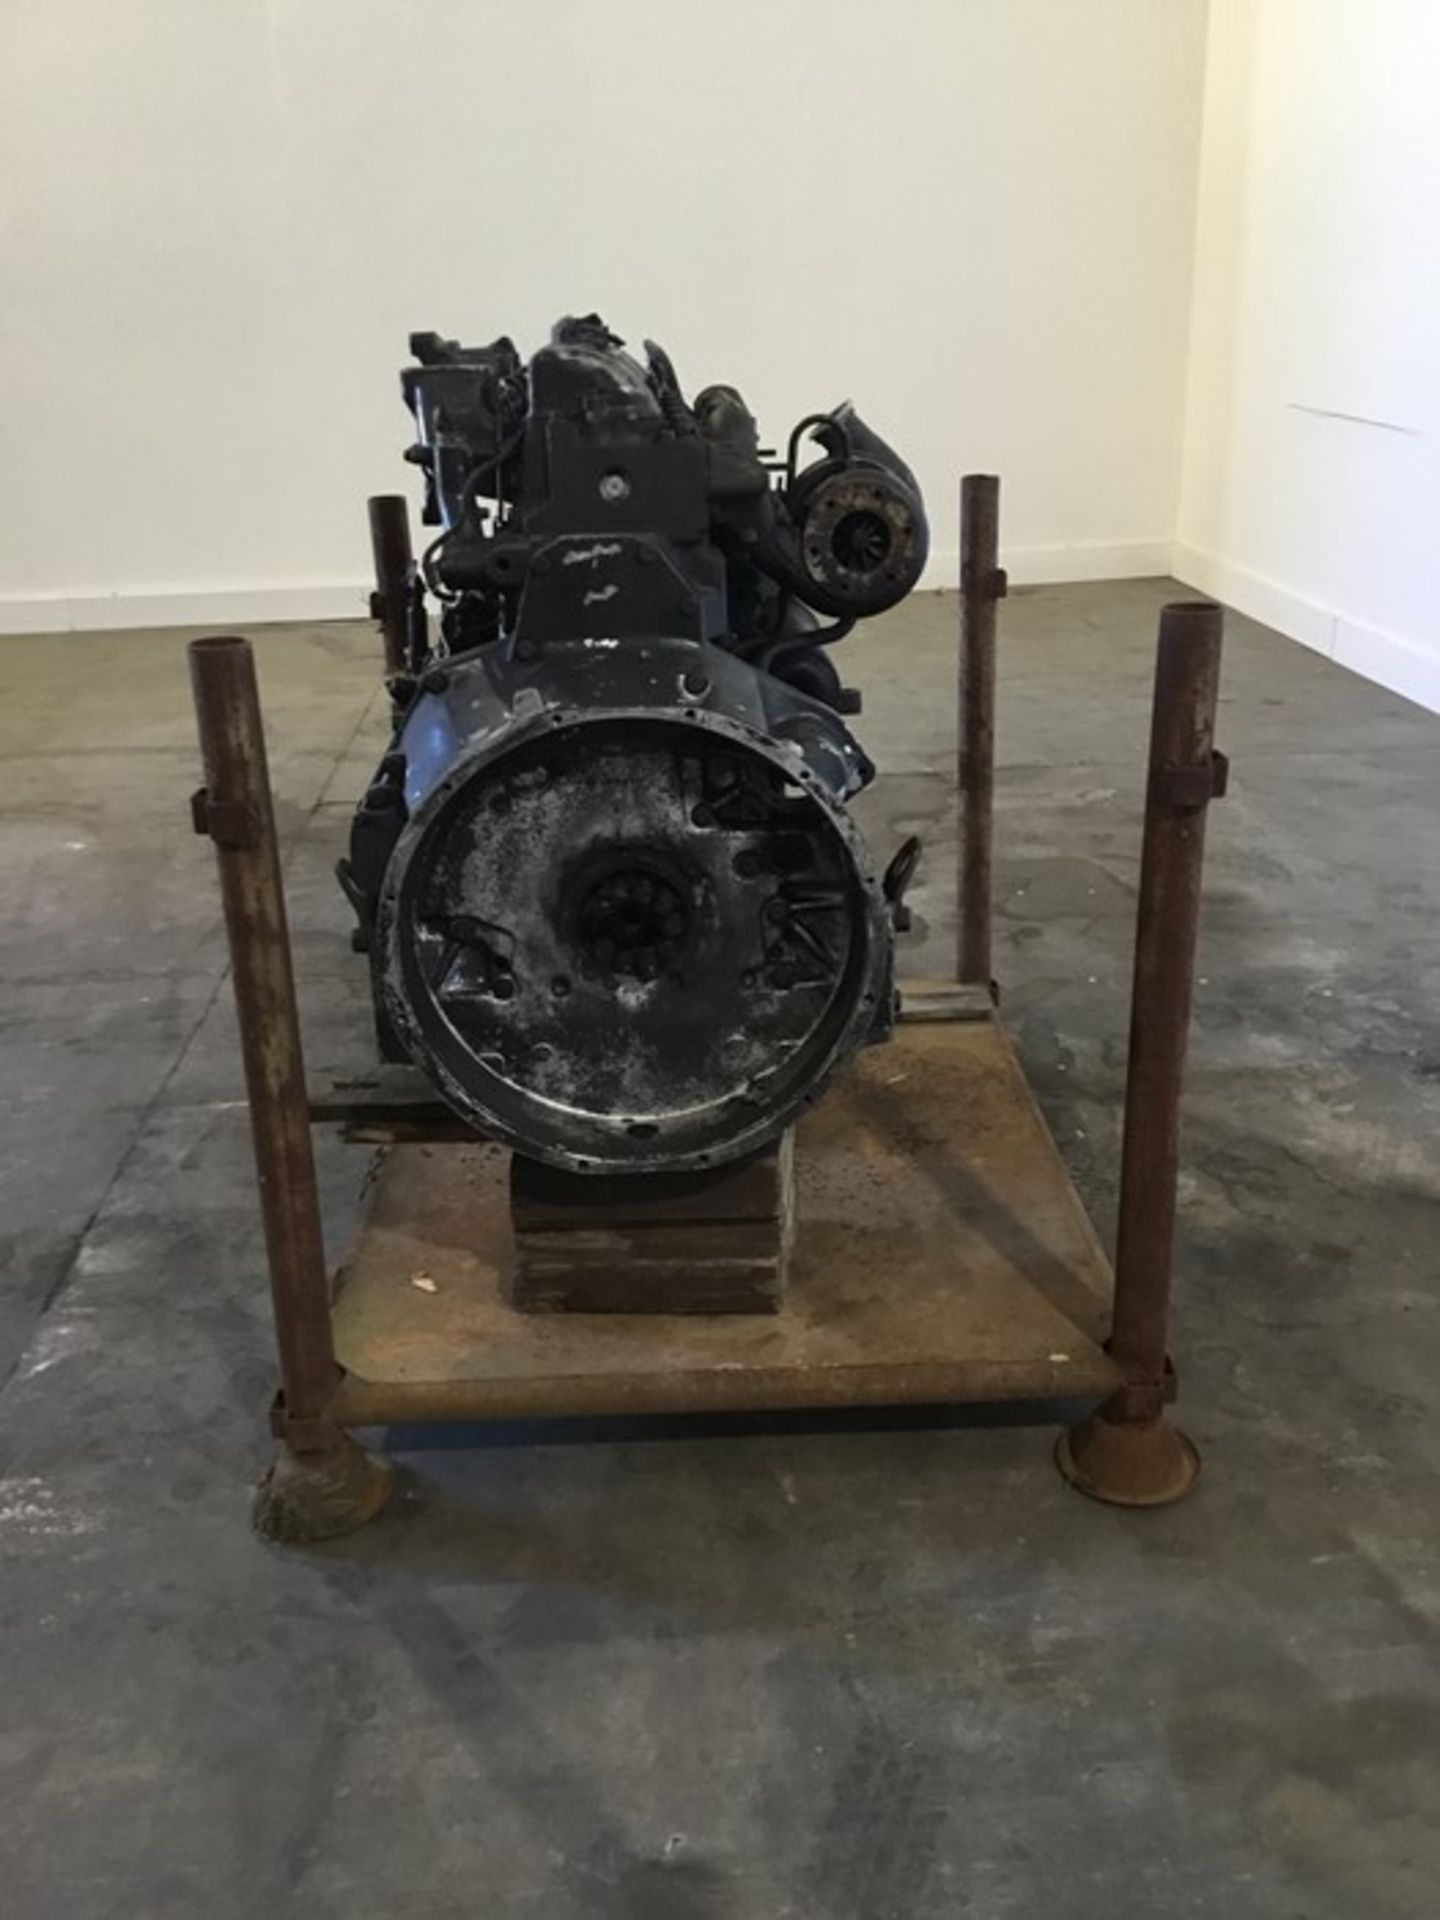 MAN D2865LF Diesel Engine: MAN D2865LF 5cyl Turbo Serial 248639372D181 Used incomplete - Image 11 of 18